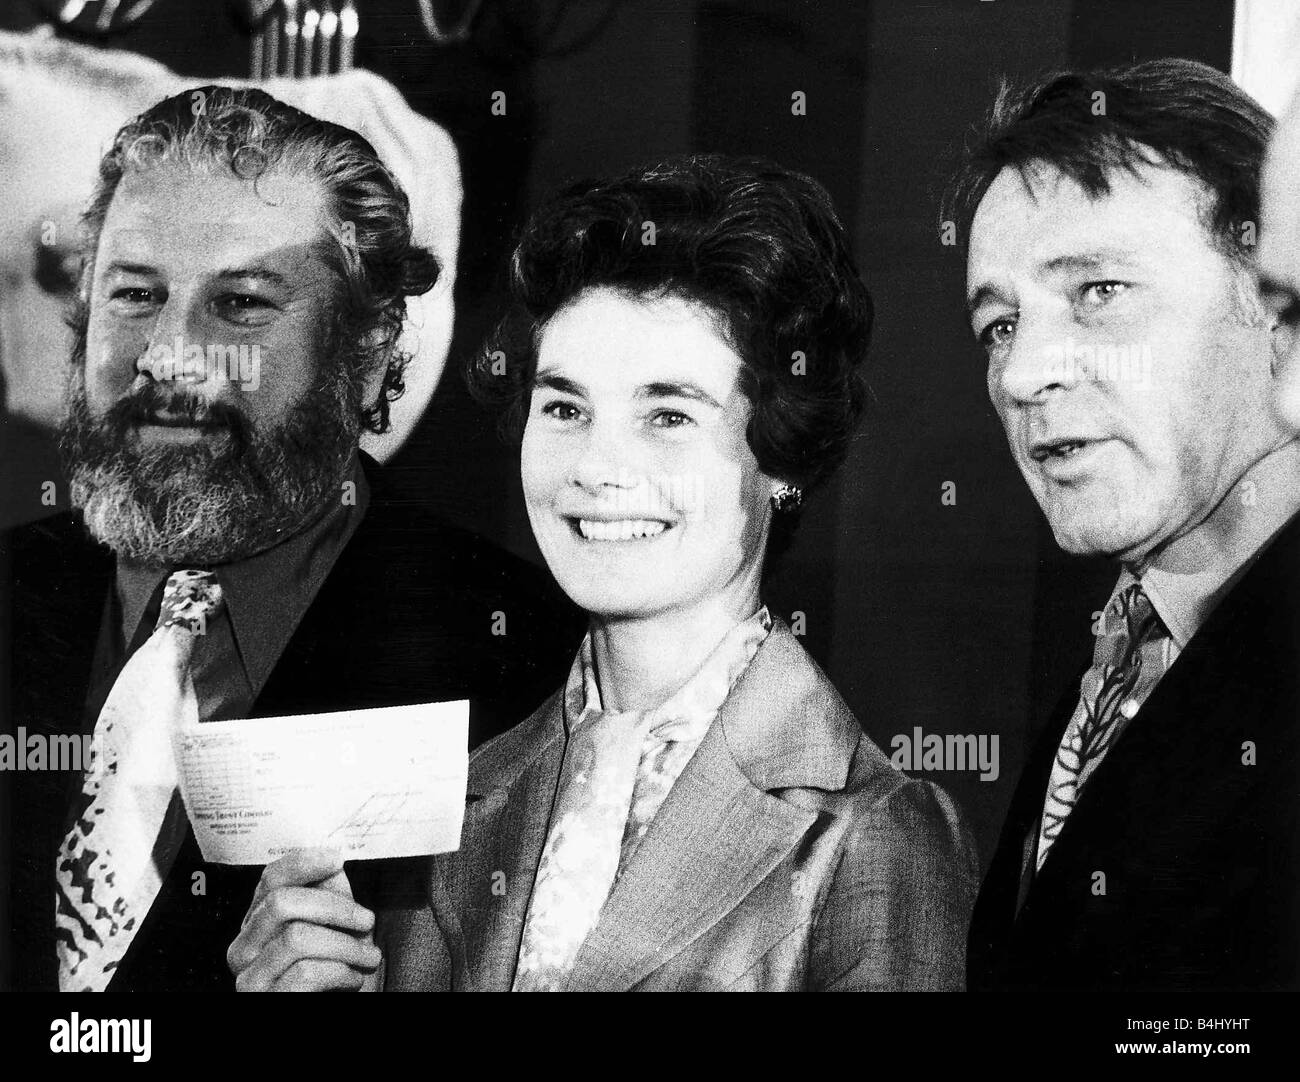 Peter Ustinov Actor July 1972 Ambassador for UNICEF with Lady Countess Limerick President of the United Kingdom Commitee for UNICEF receiving a cheque worth 19 000 from Richard Burton Actor DBase MSI Stock Photo